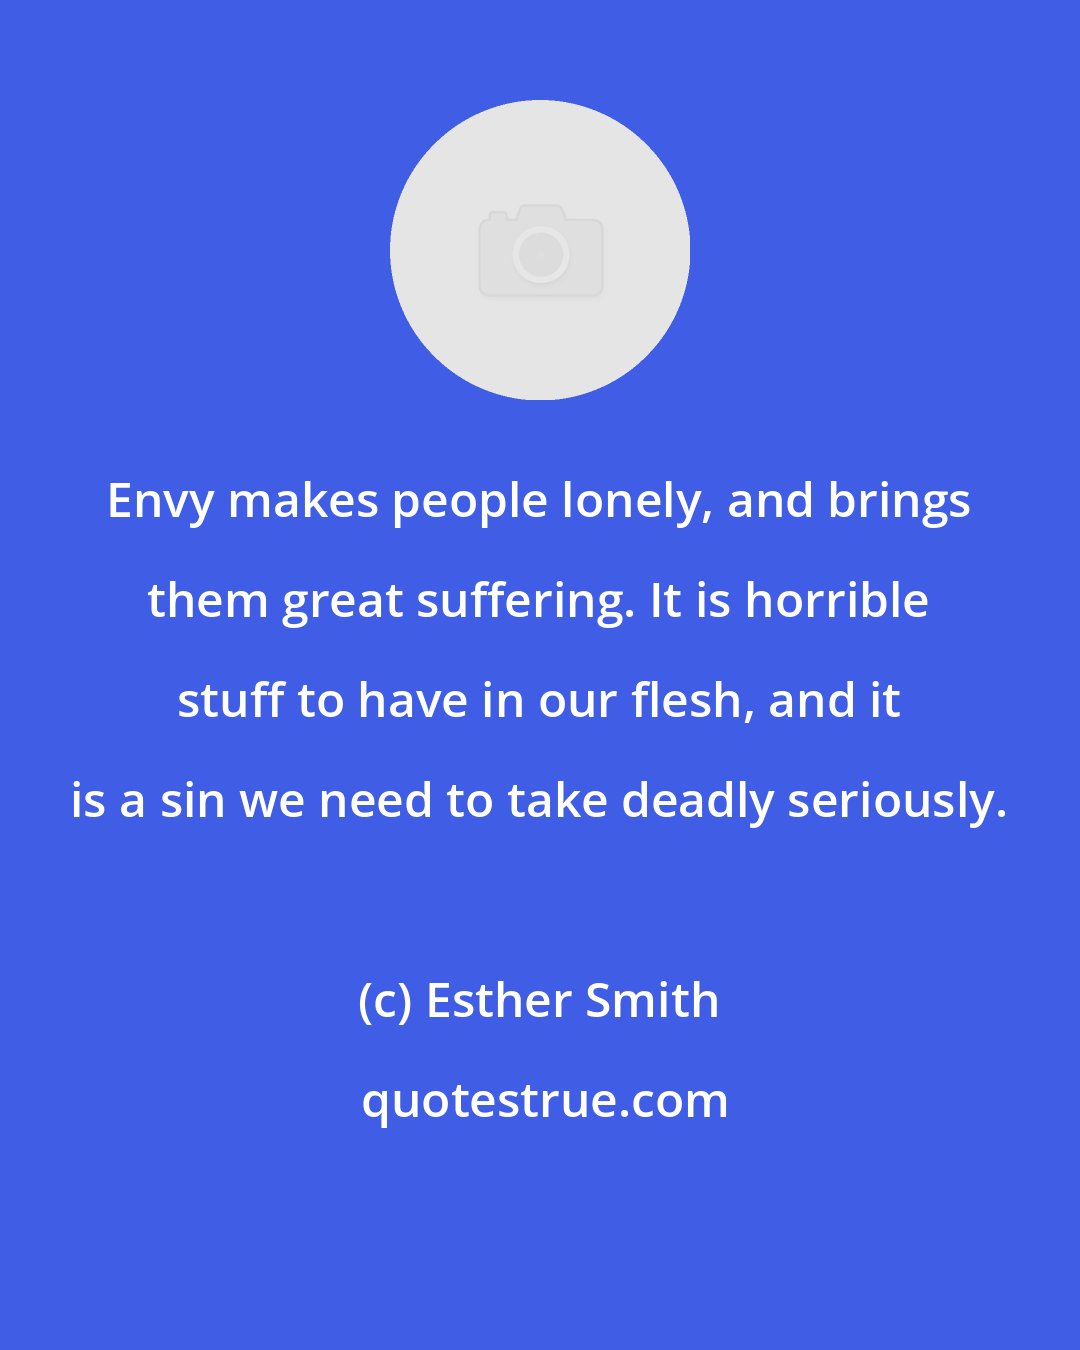 Esther Smith: Envy makes people lonely, and brings them great suffering. It is horrible stuff to have in our flesh, and it is a sin we need to take deadly seriously.